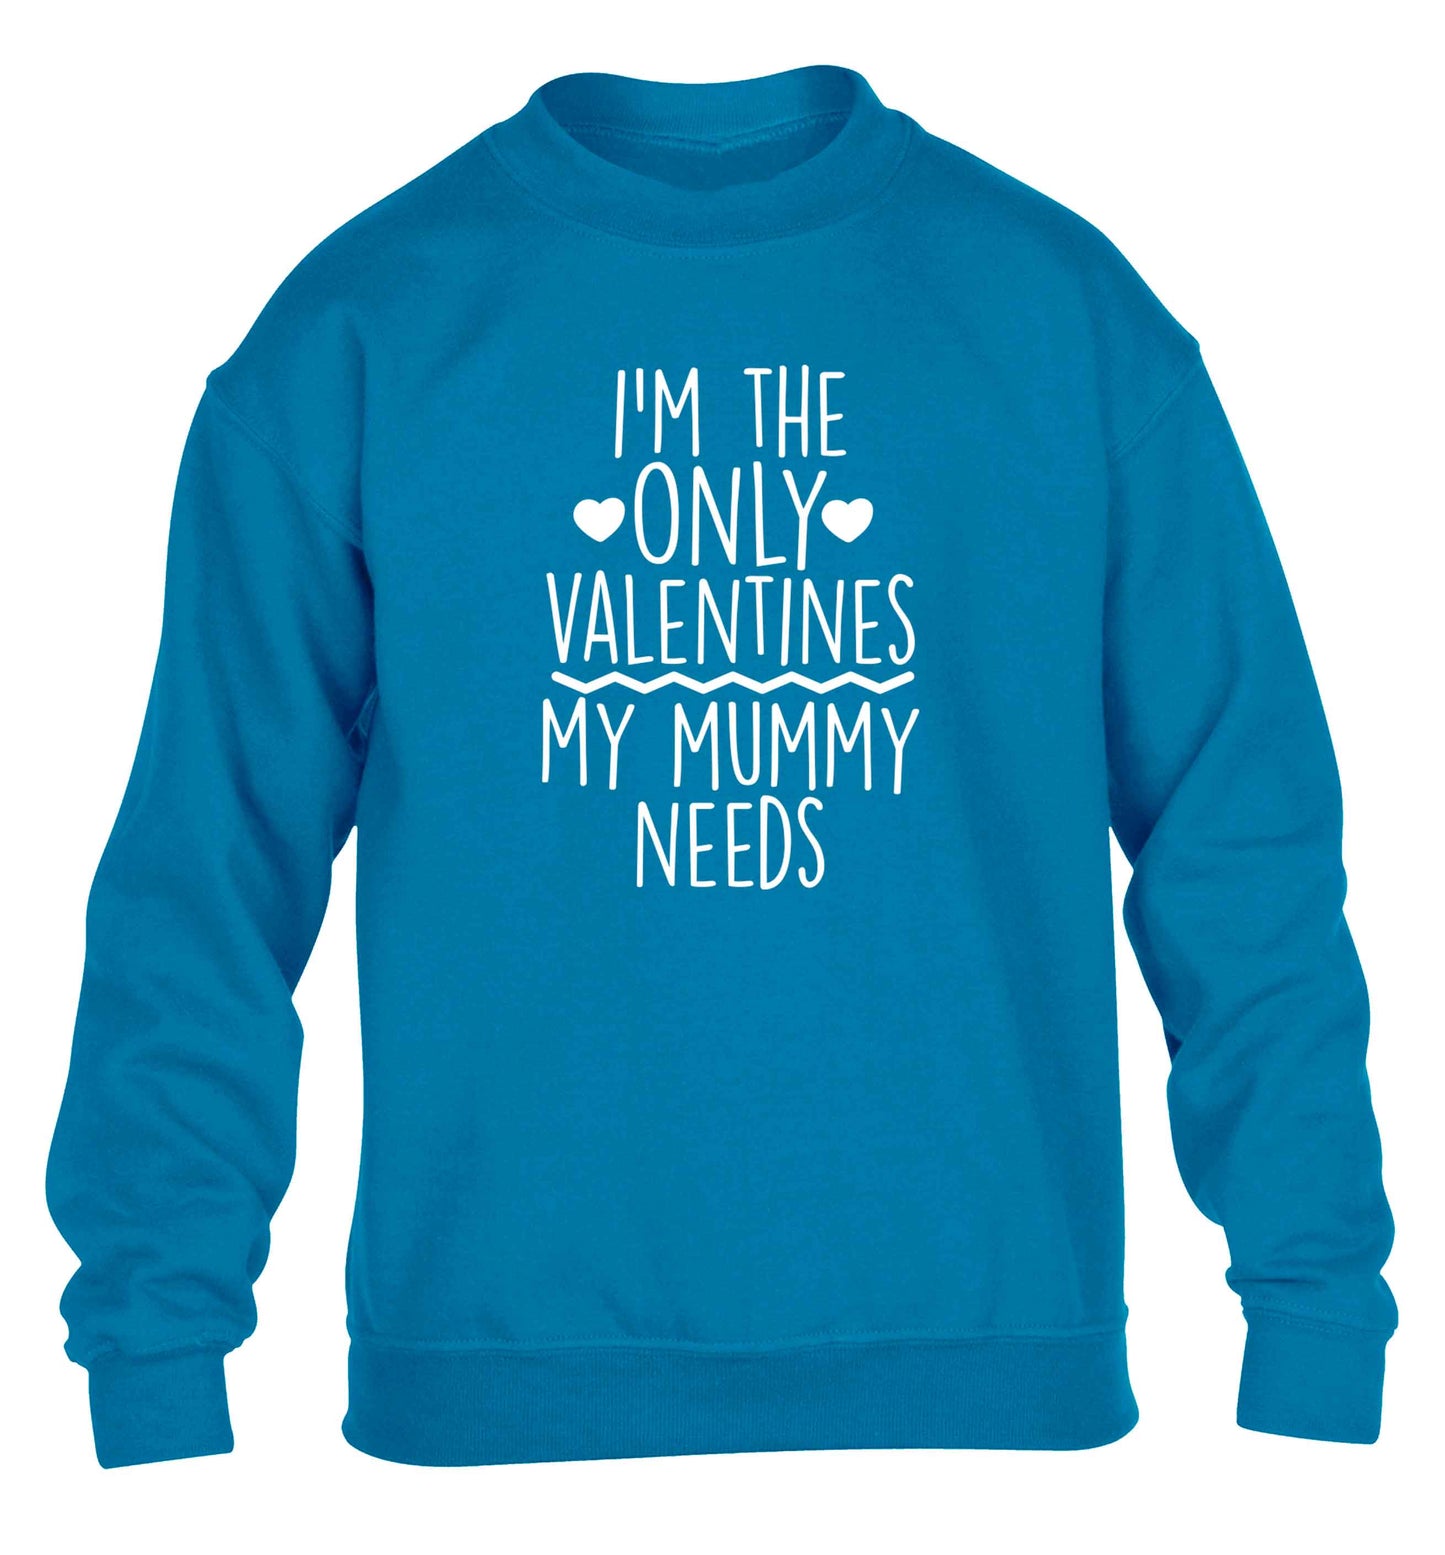 I'm the only valentines my mummy needs children's blue sweater 12-13 Years